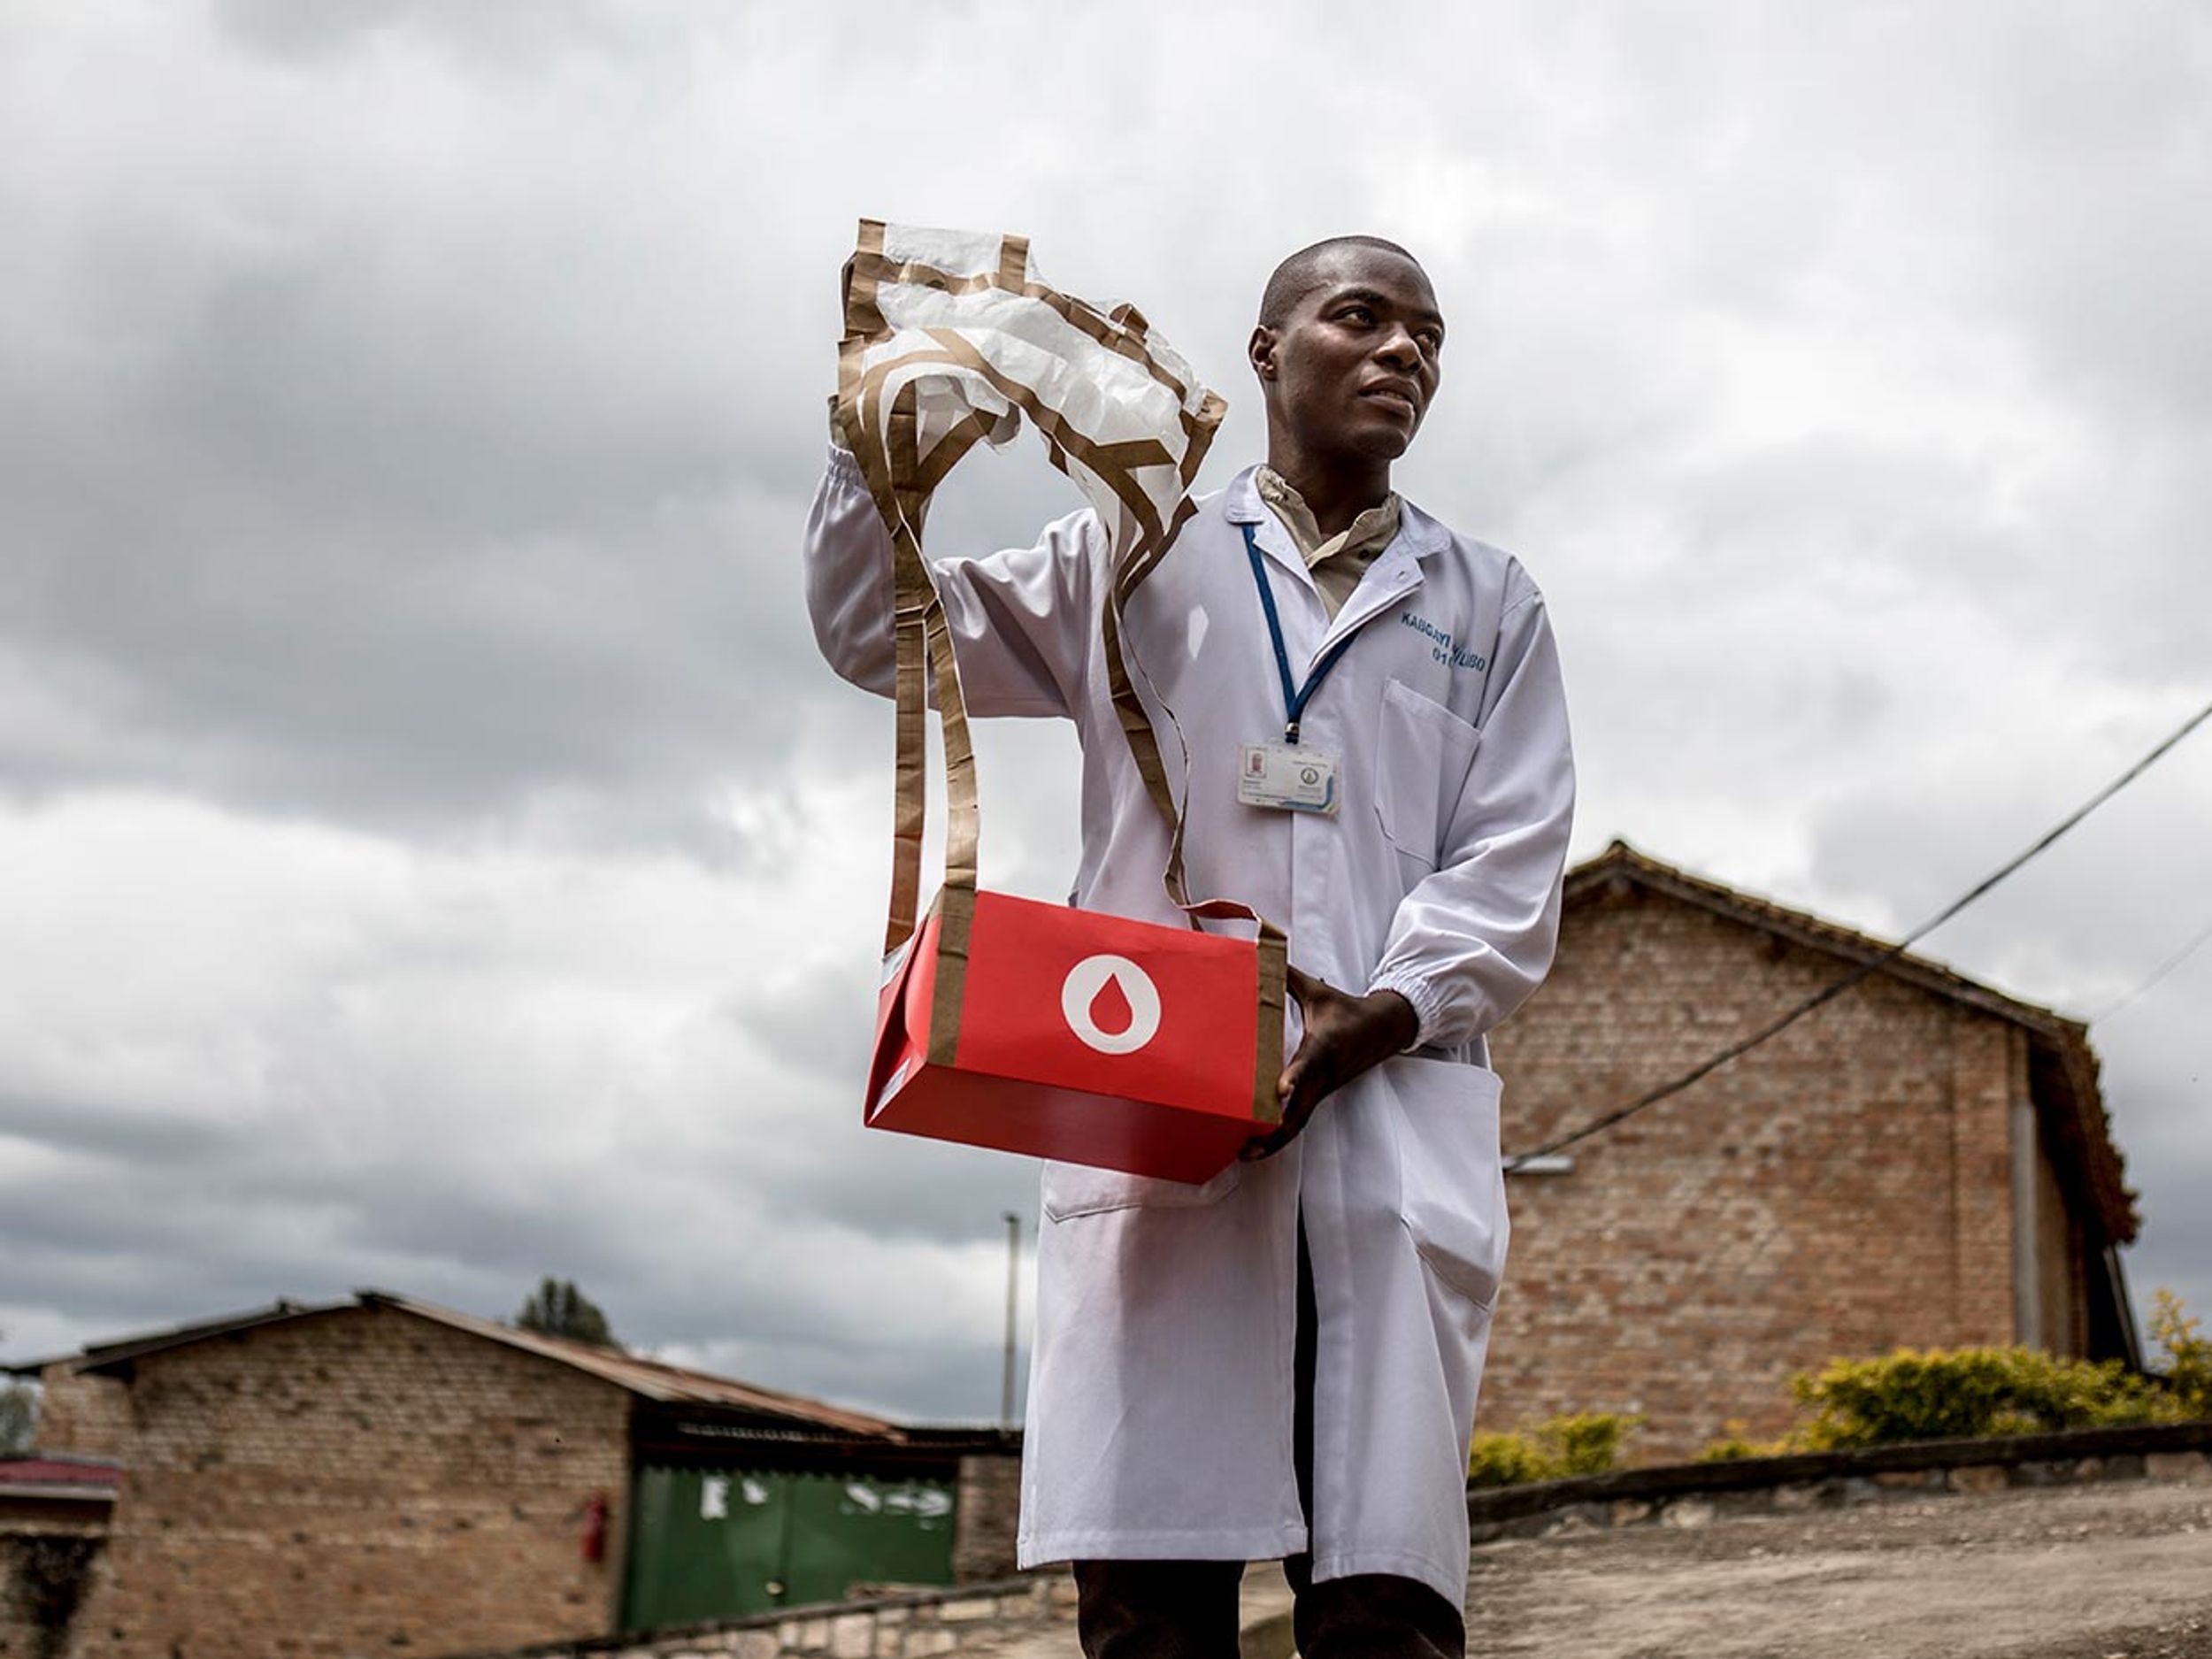 A man holding blood drone delivery at medical facility in Rwanda.